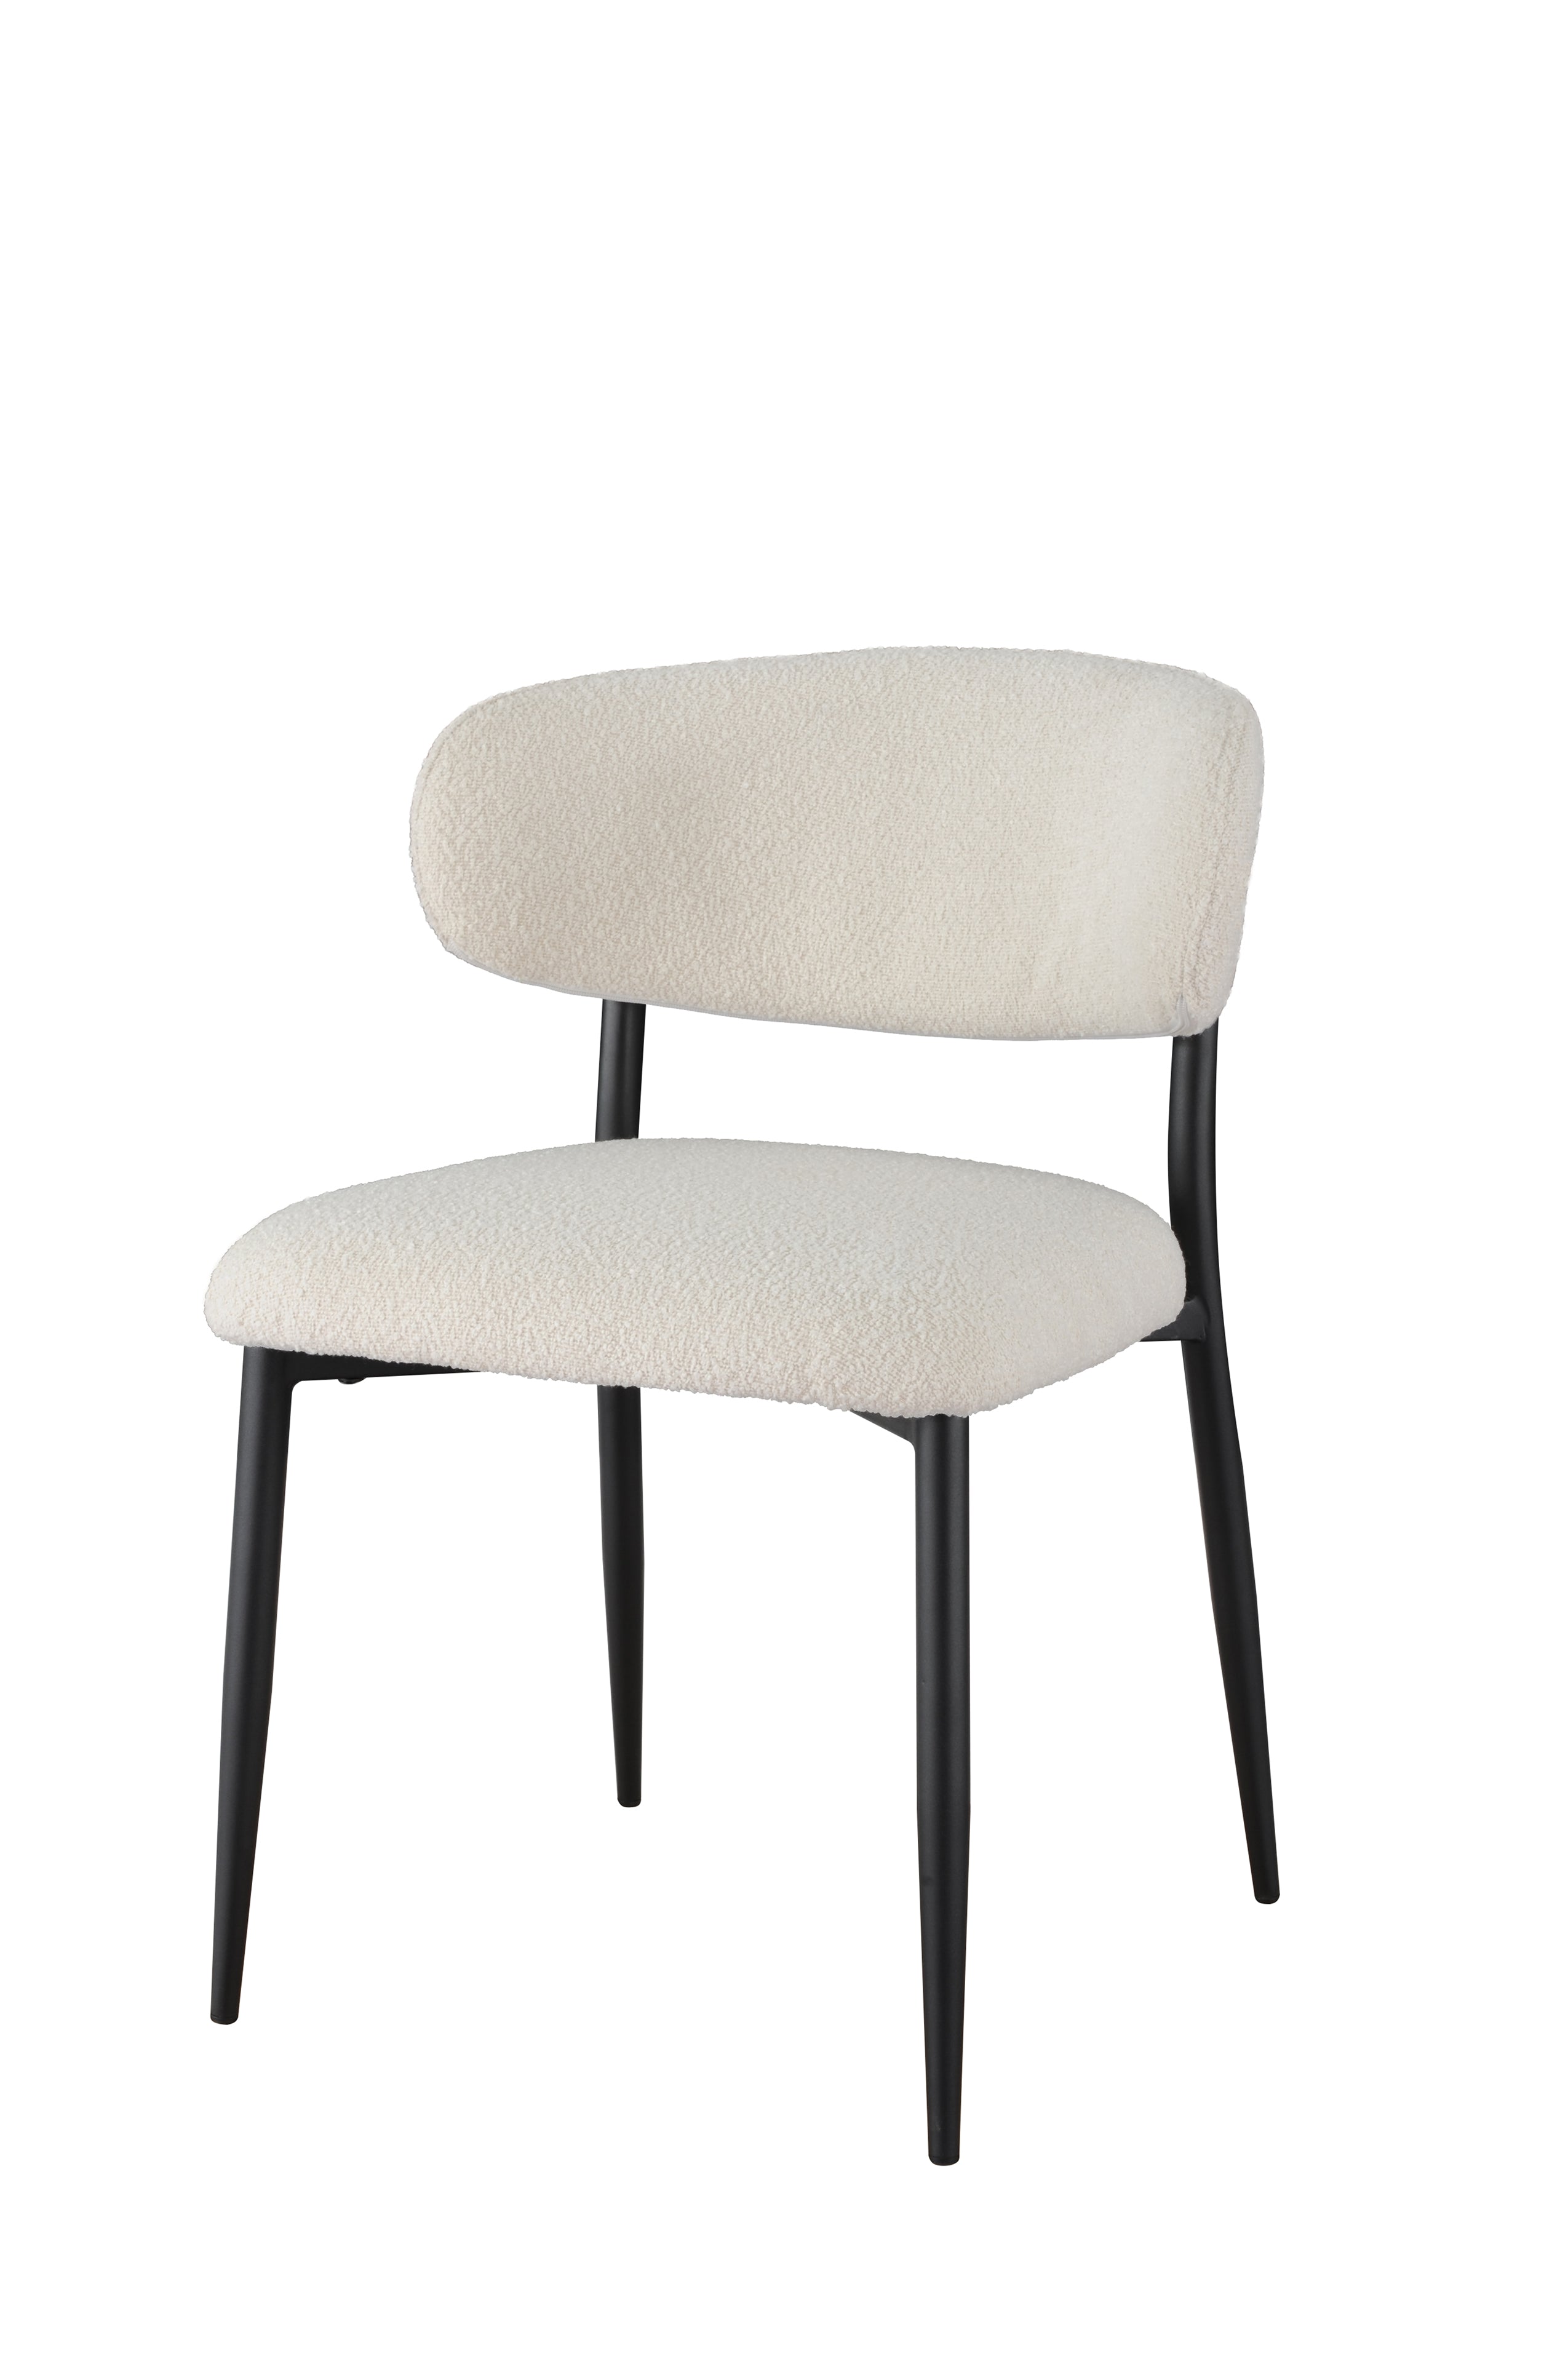 Malia Dining Chair - Off White (Set of 2)